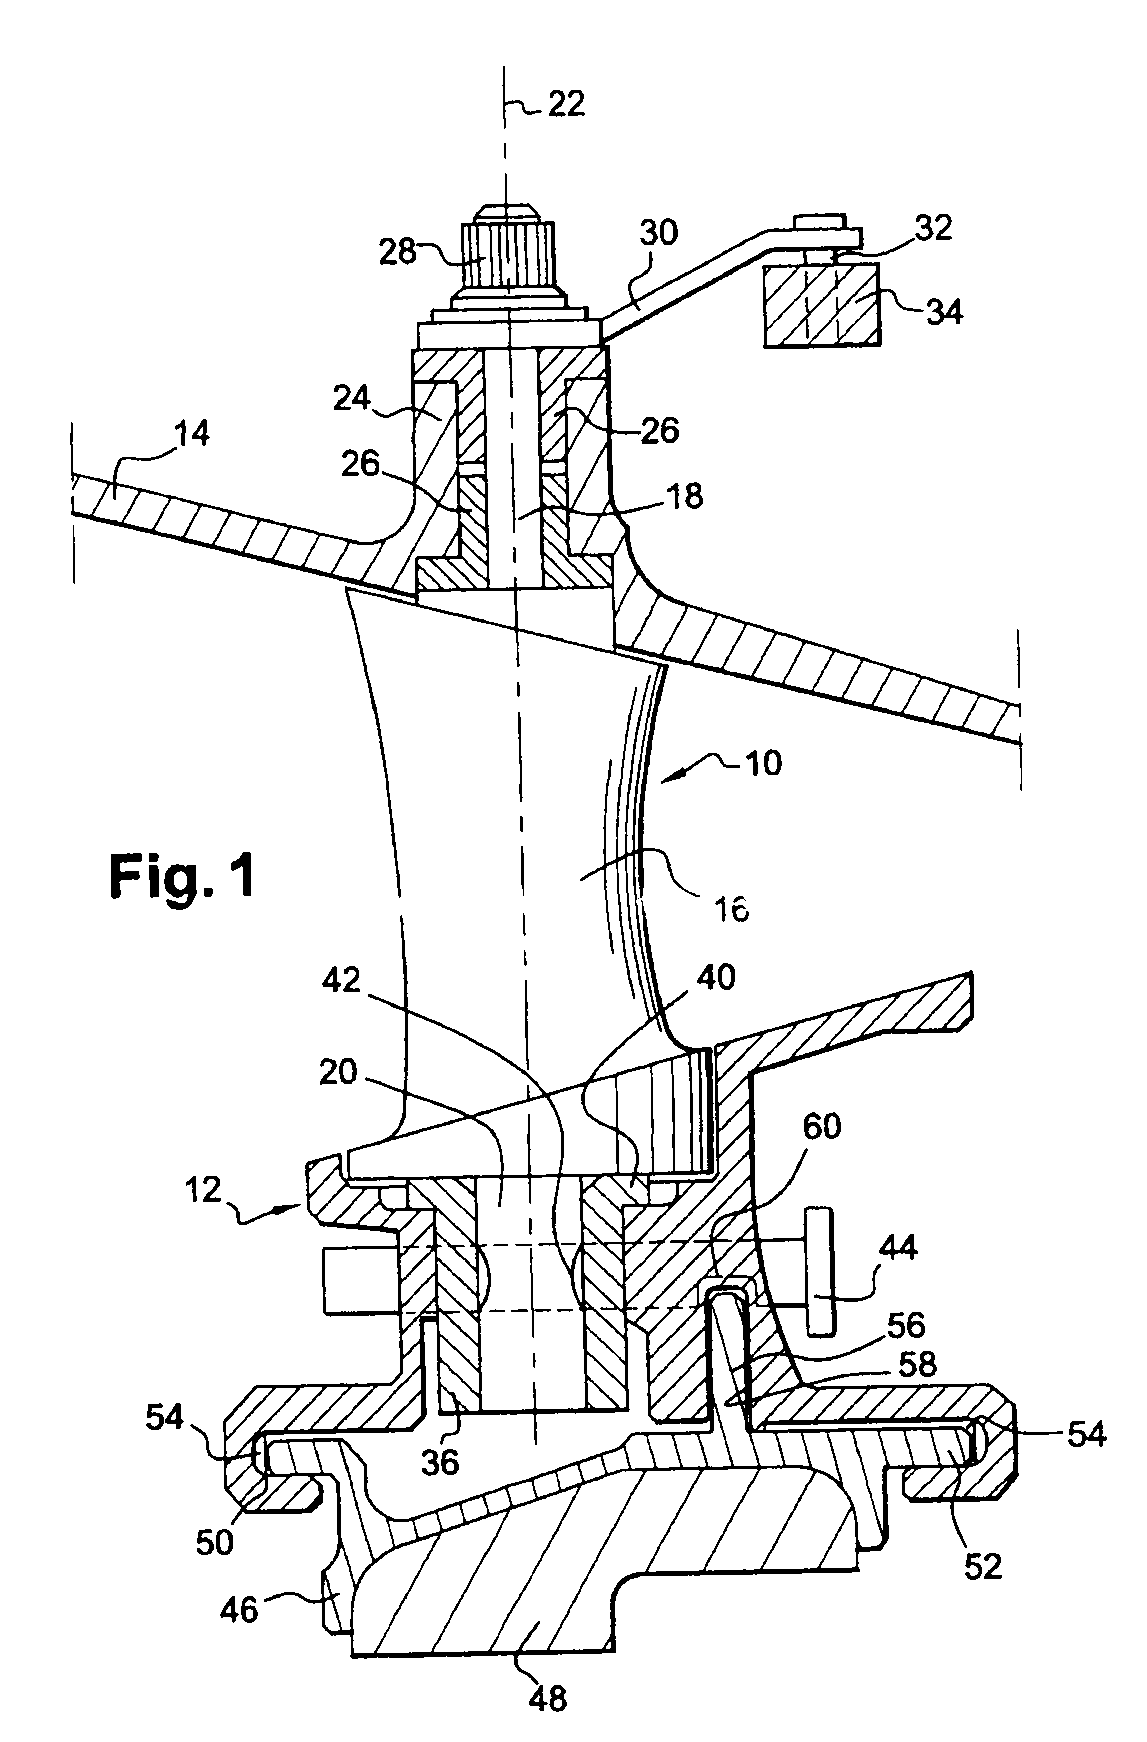 Stage of variable-pitch vanes for a turbomachine